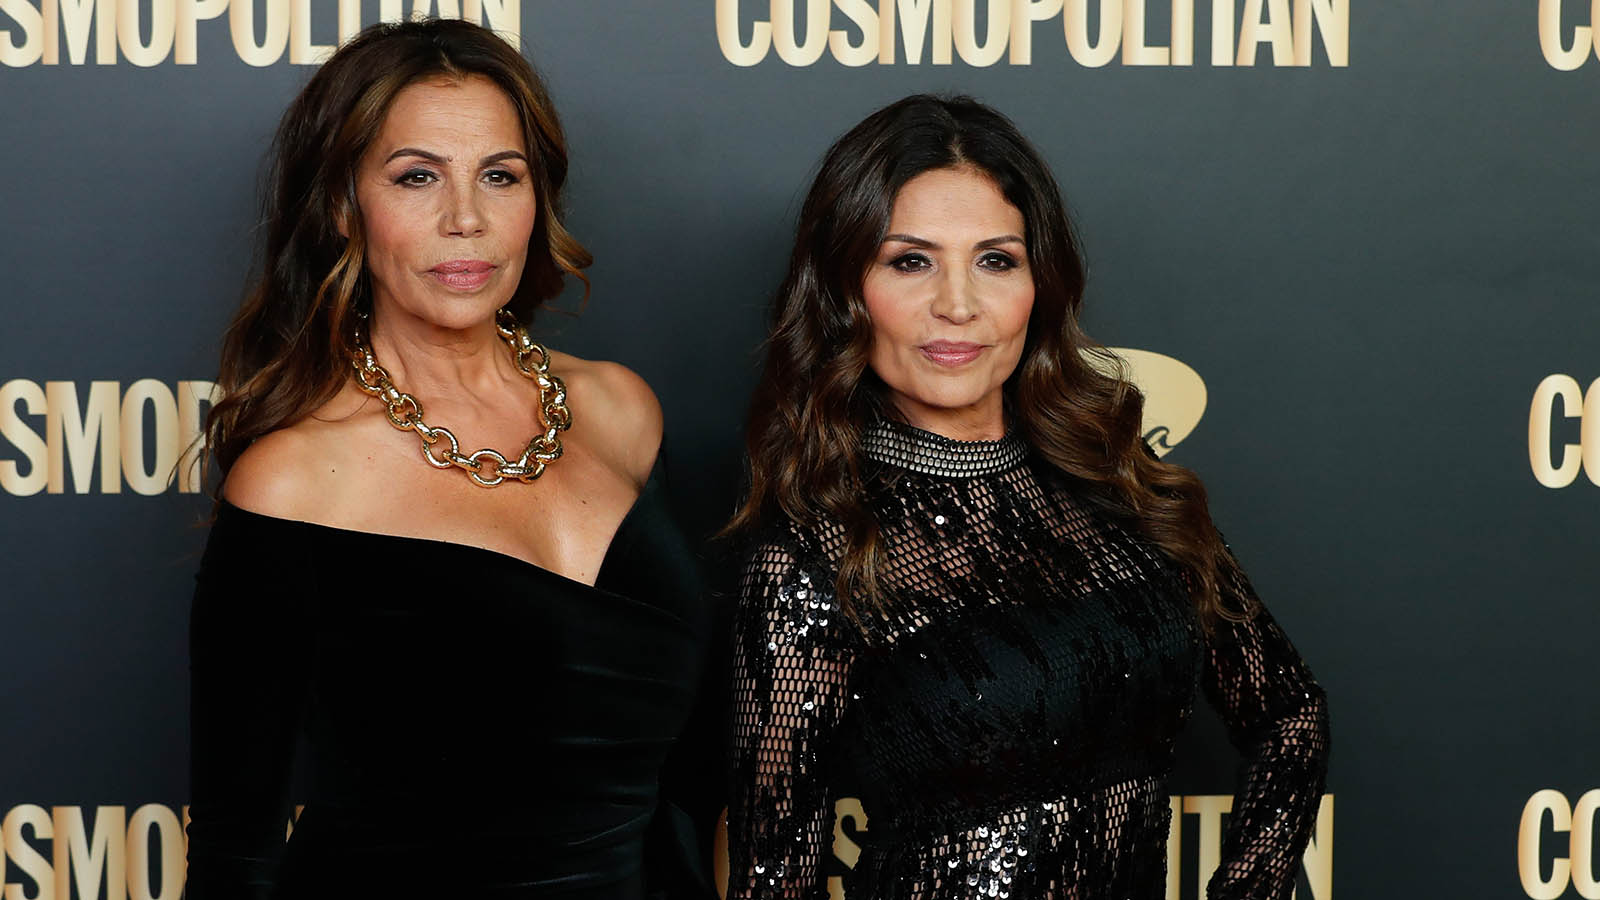 Singers Toñi and Encarna Salazar (Azucar Moreno) at photocall for Cosmopolitan awards in Madrid on Thursday, 24 October 2019.